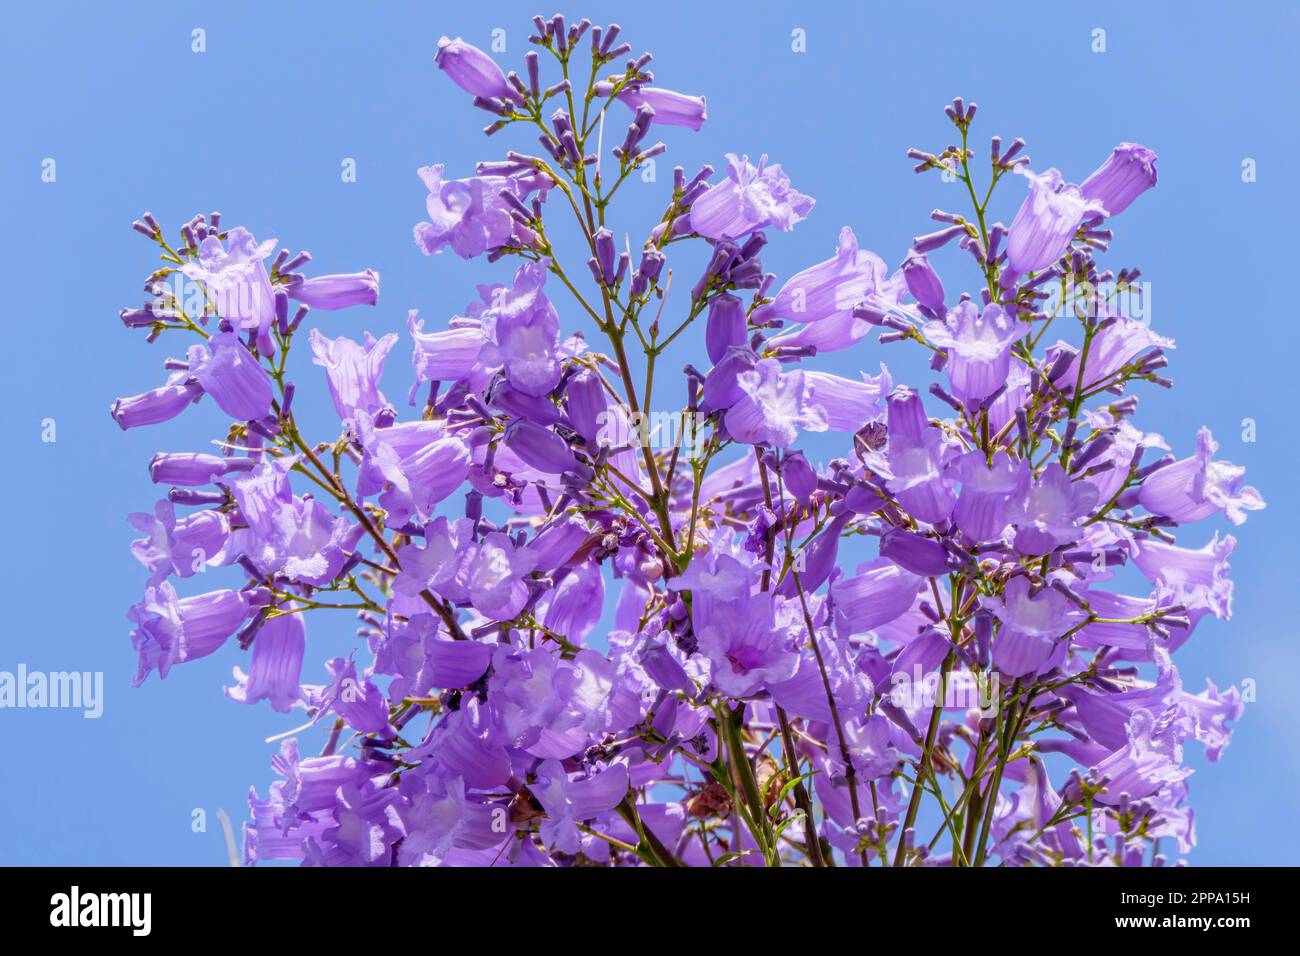 Violet flowers and seeds of the Jacaranda tree among the foliage against the blue sky. Closeup Stock Photo